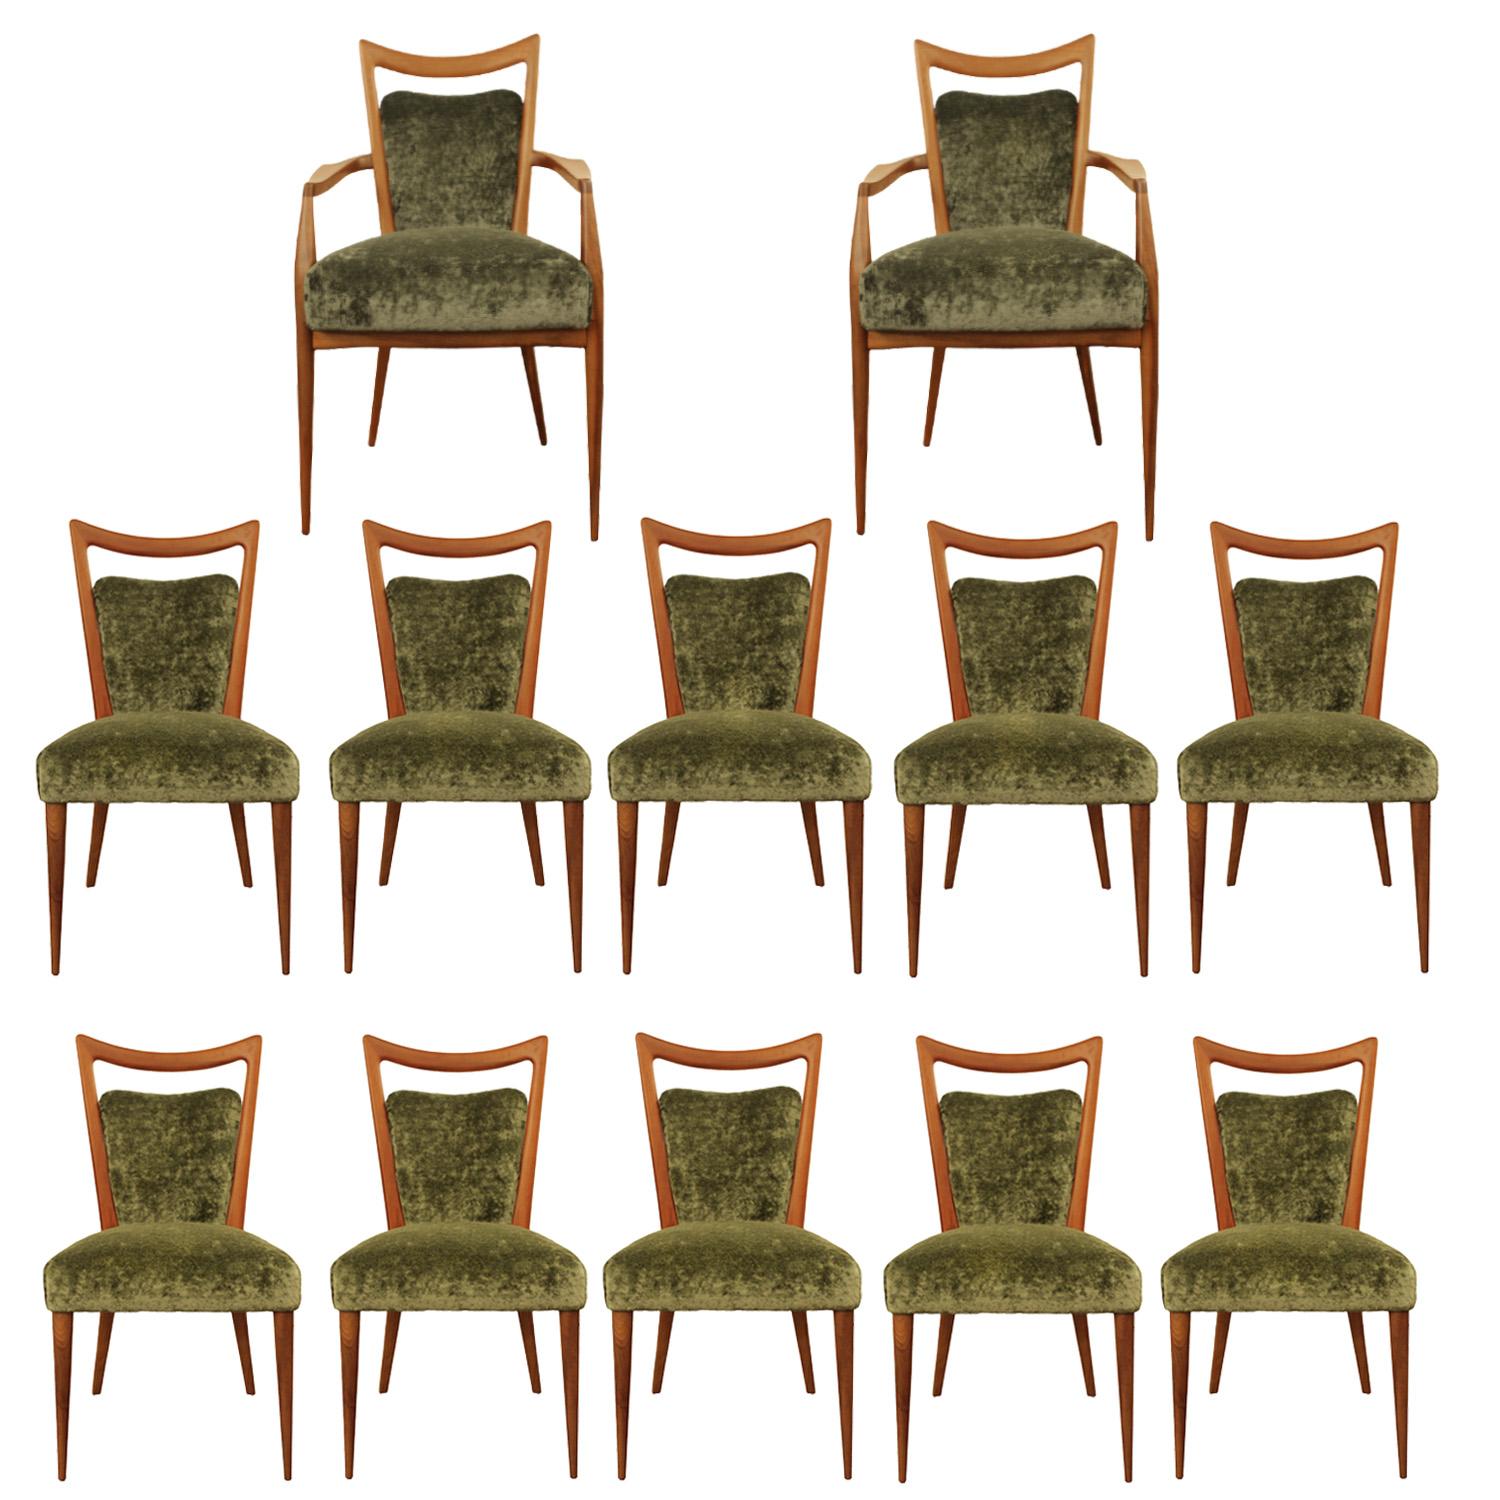 Stunning Set of 12 mid-century modern dining chairs (2 Arm and 10 Side) in walnut,  upholstered in lush forest green crushed linen velvet by Holly Hunt.

This large ensemble of dining chairs has been refinished and reupholstered by Venfield and is